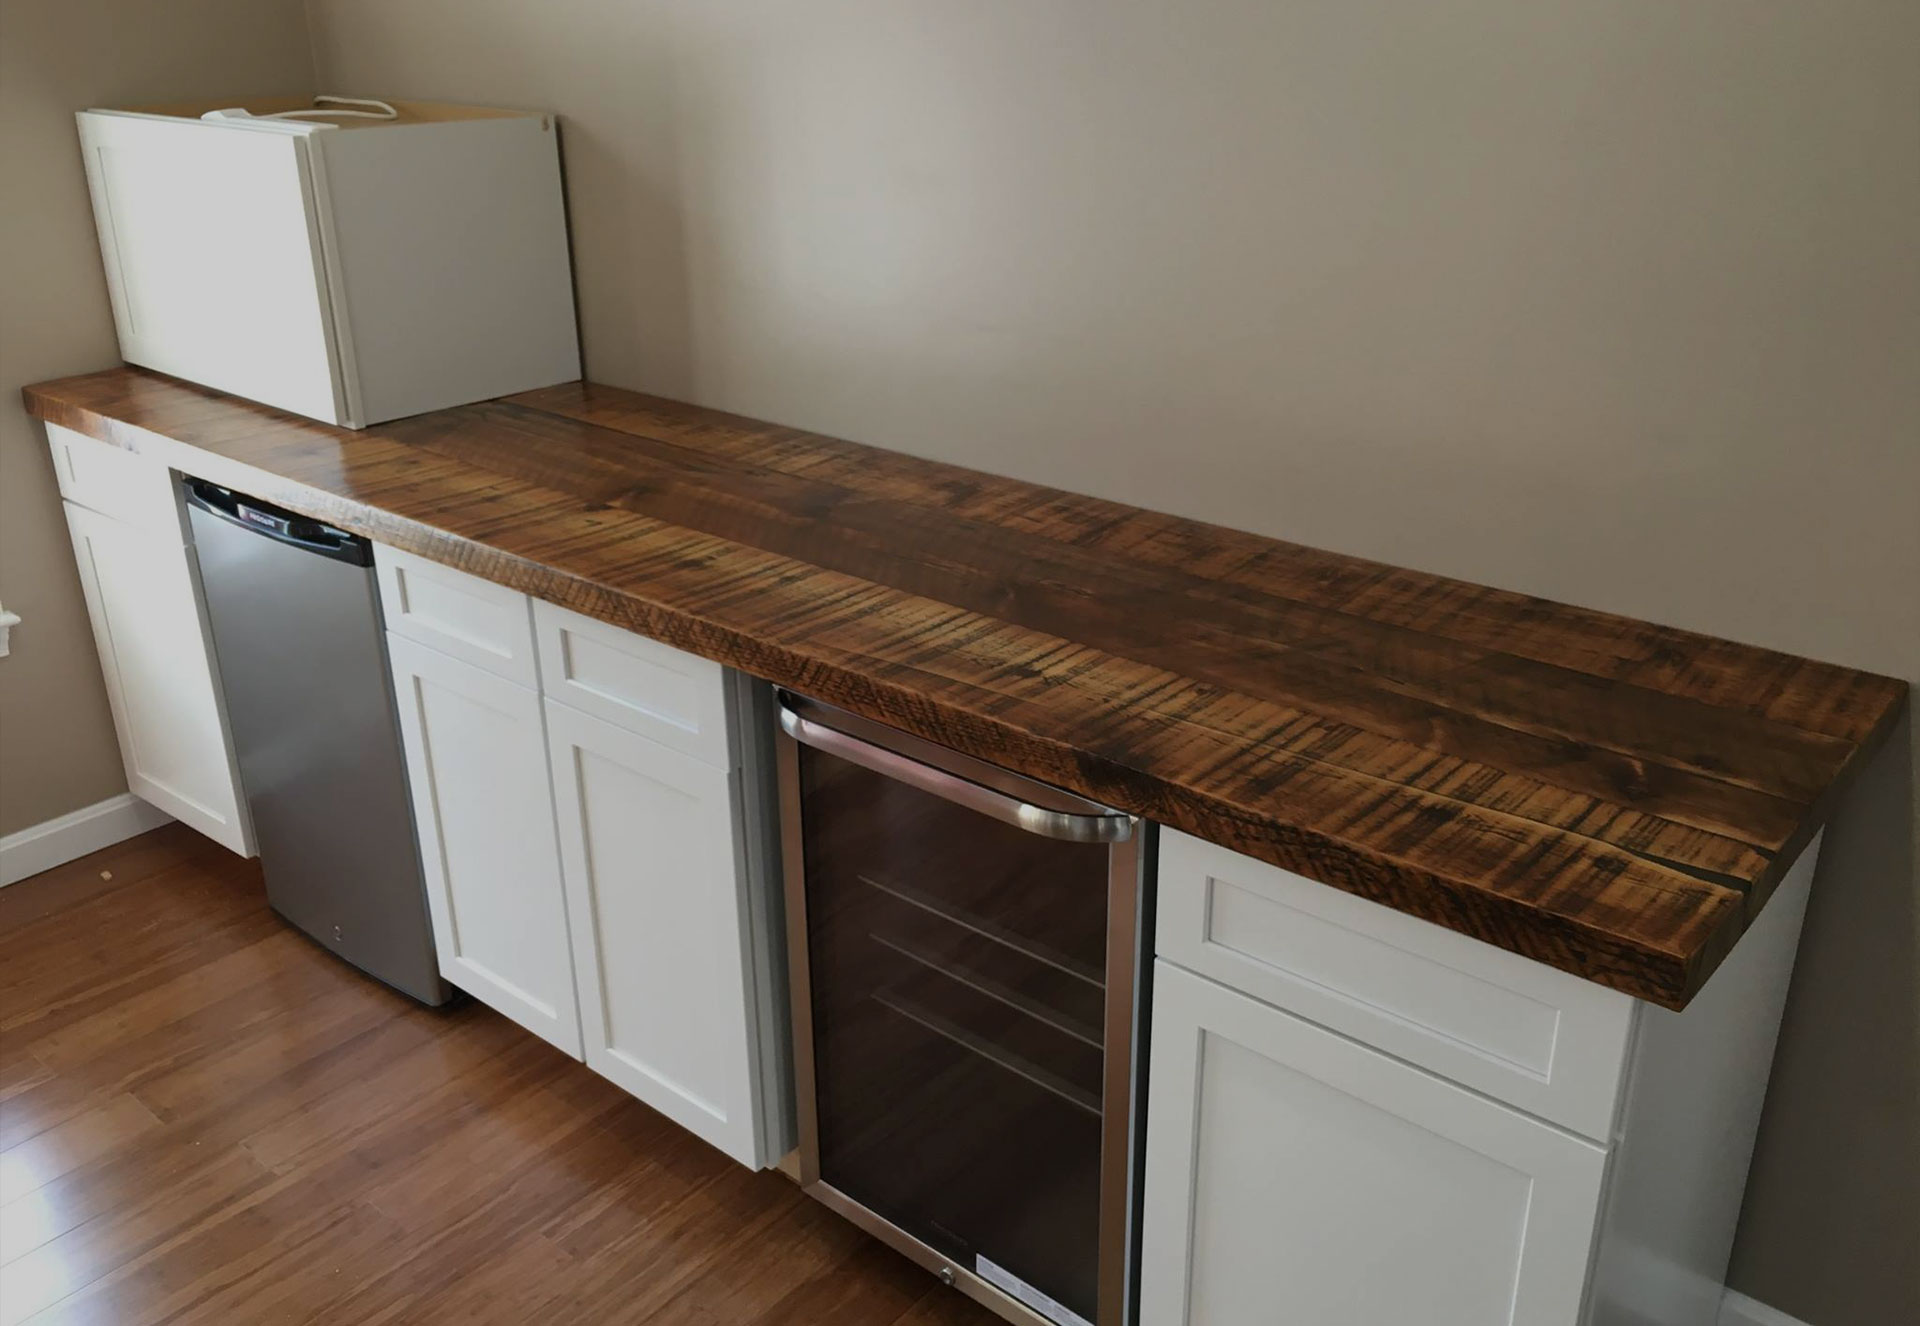 Hire an Experienced Local Carpenter in Portland, ME